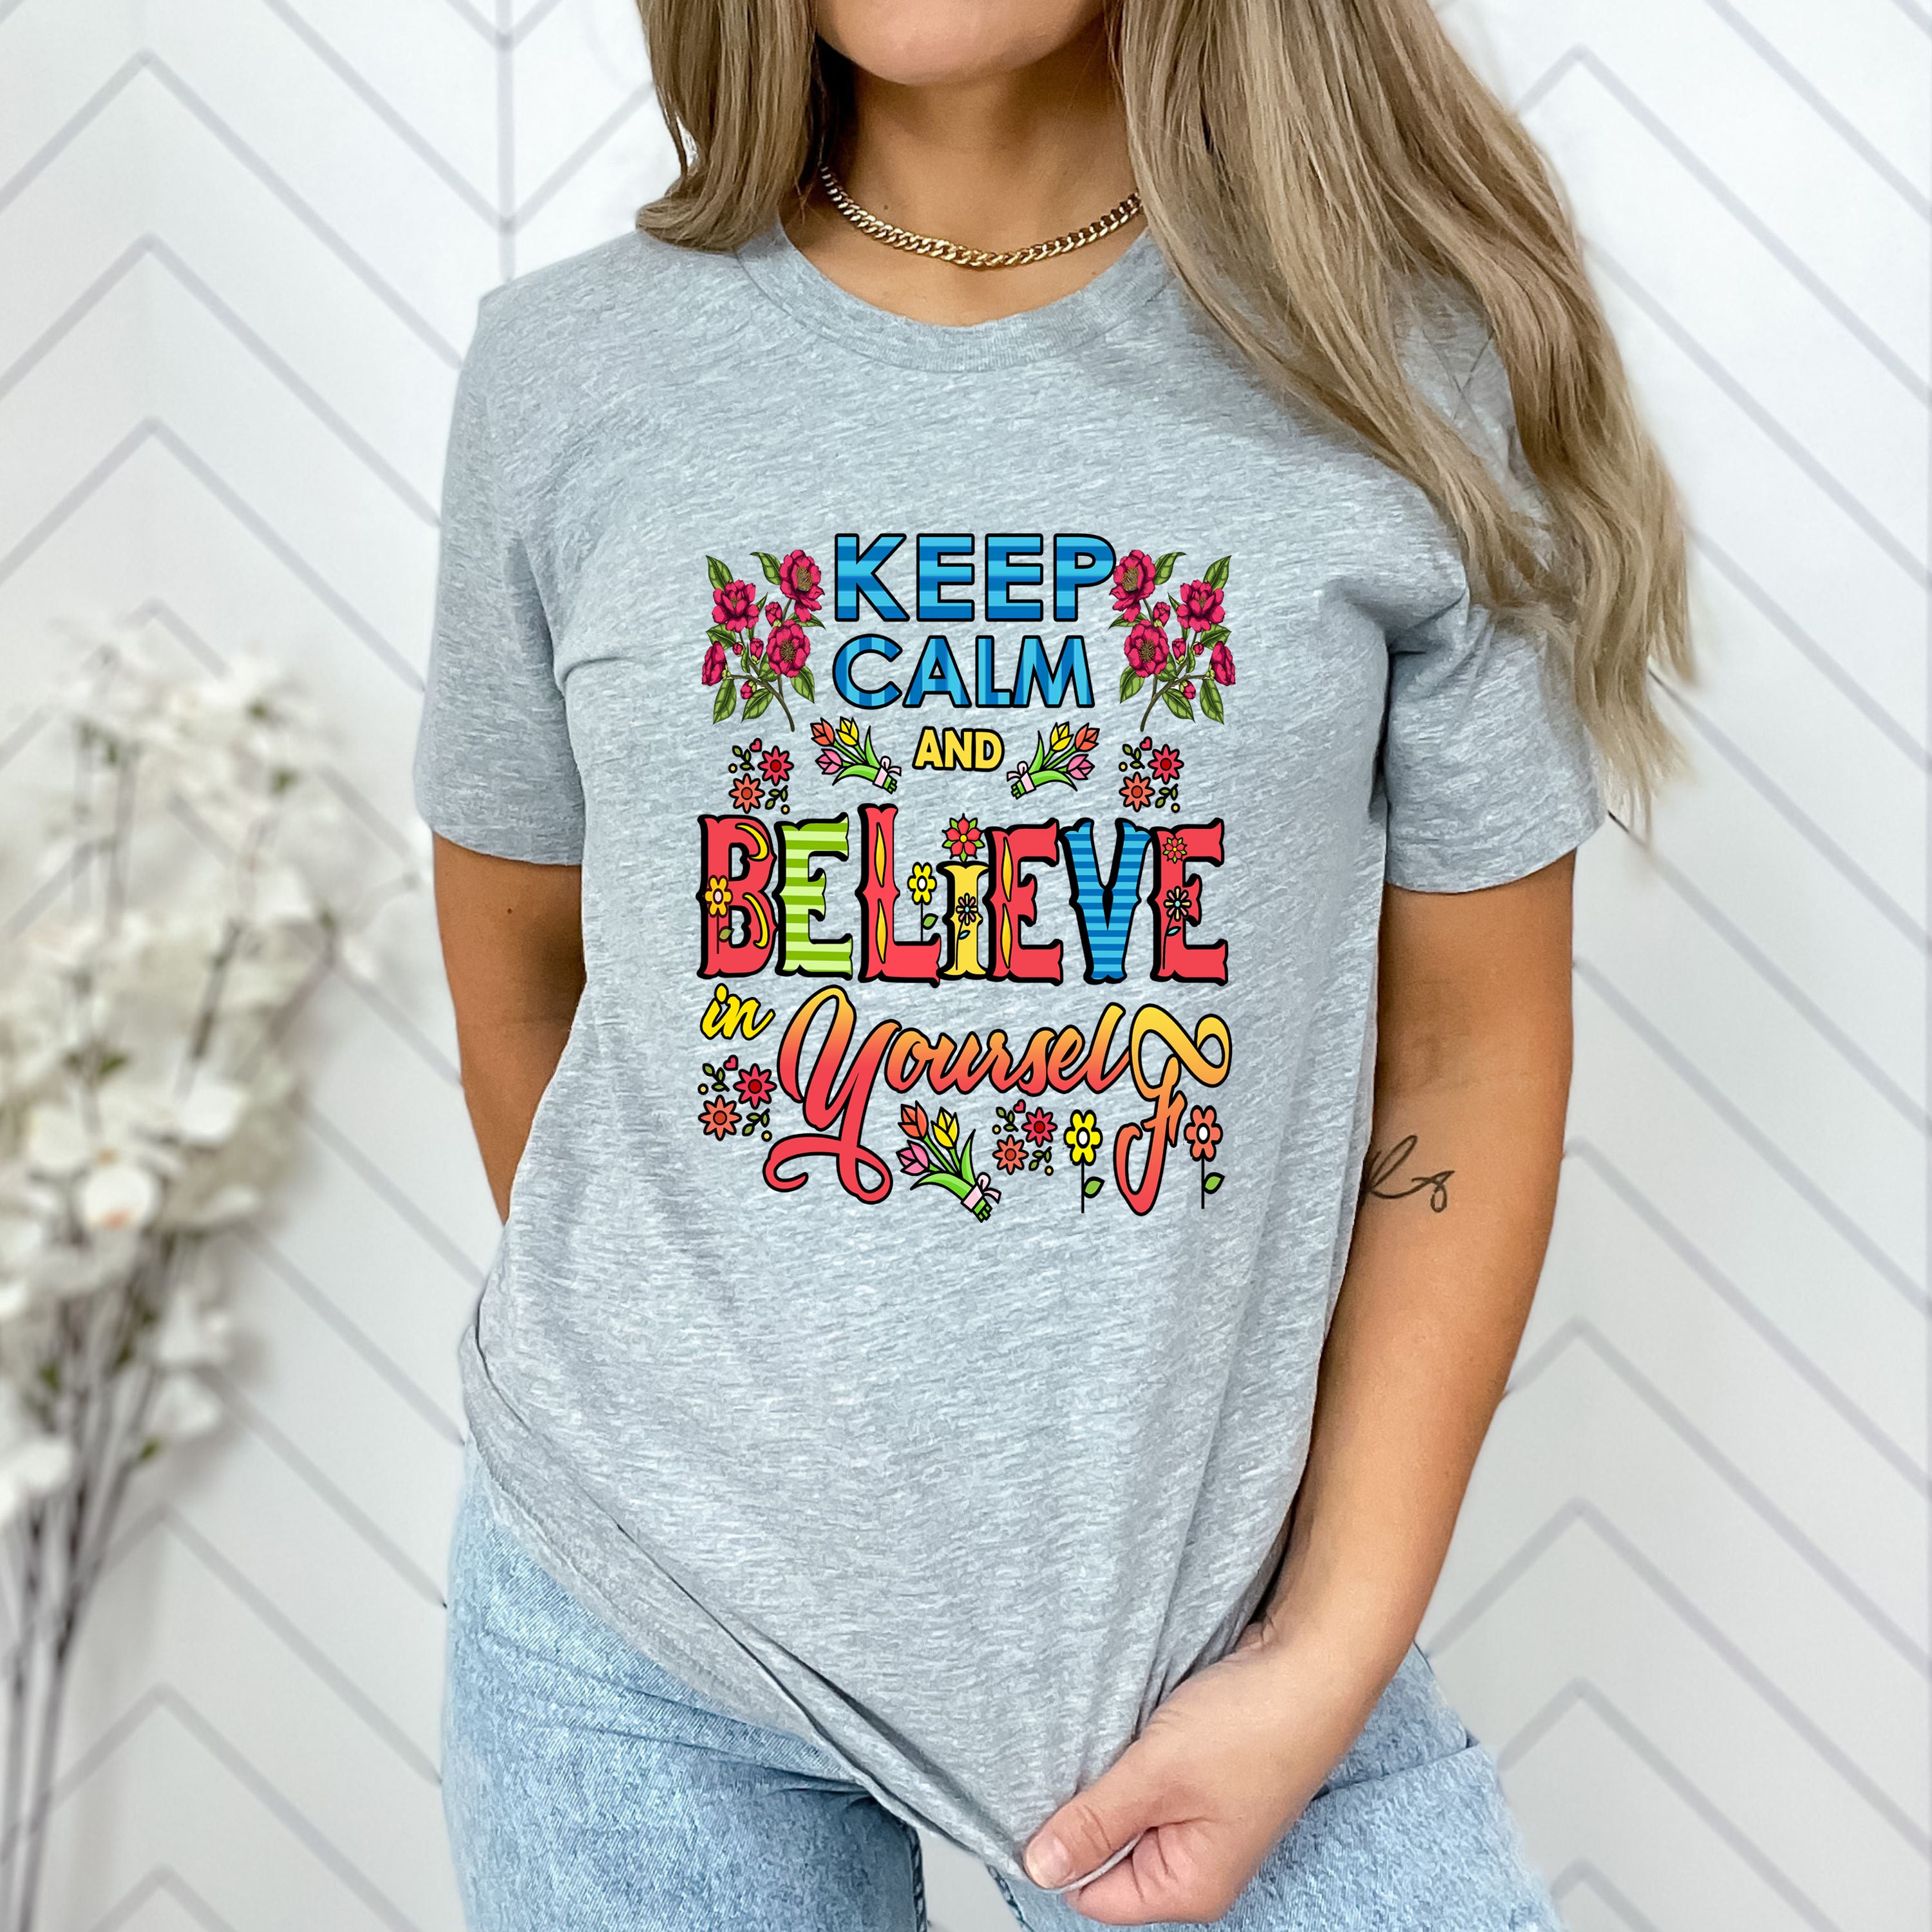 "Keep Calm And Believe Yourself", T-Shirt.